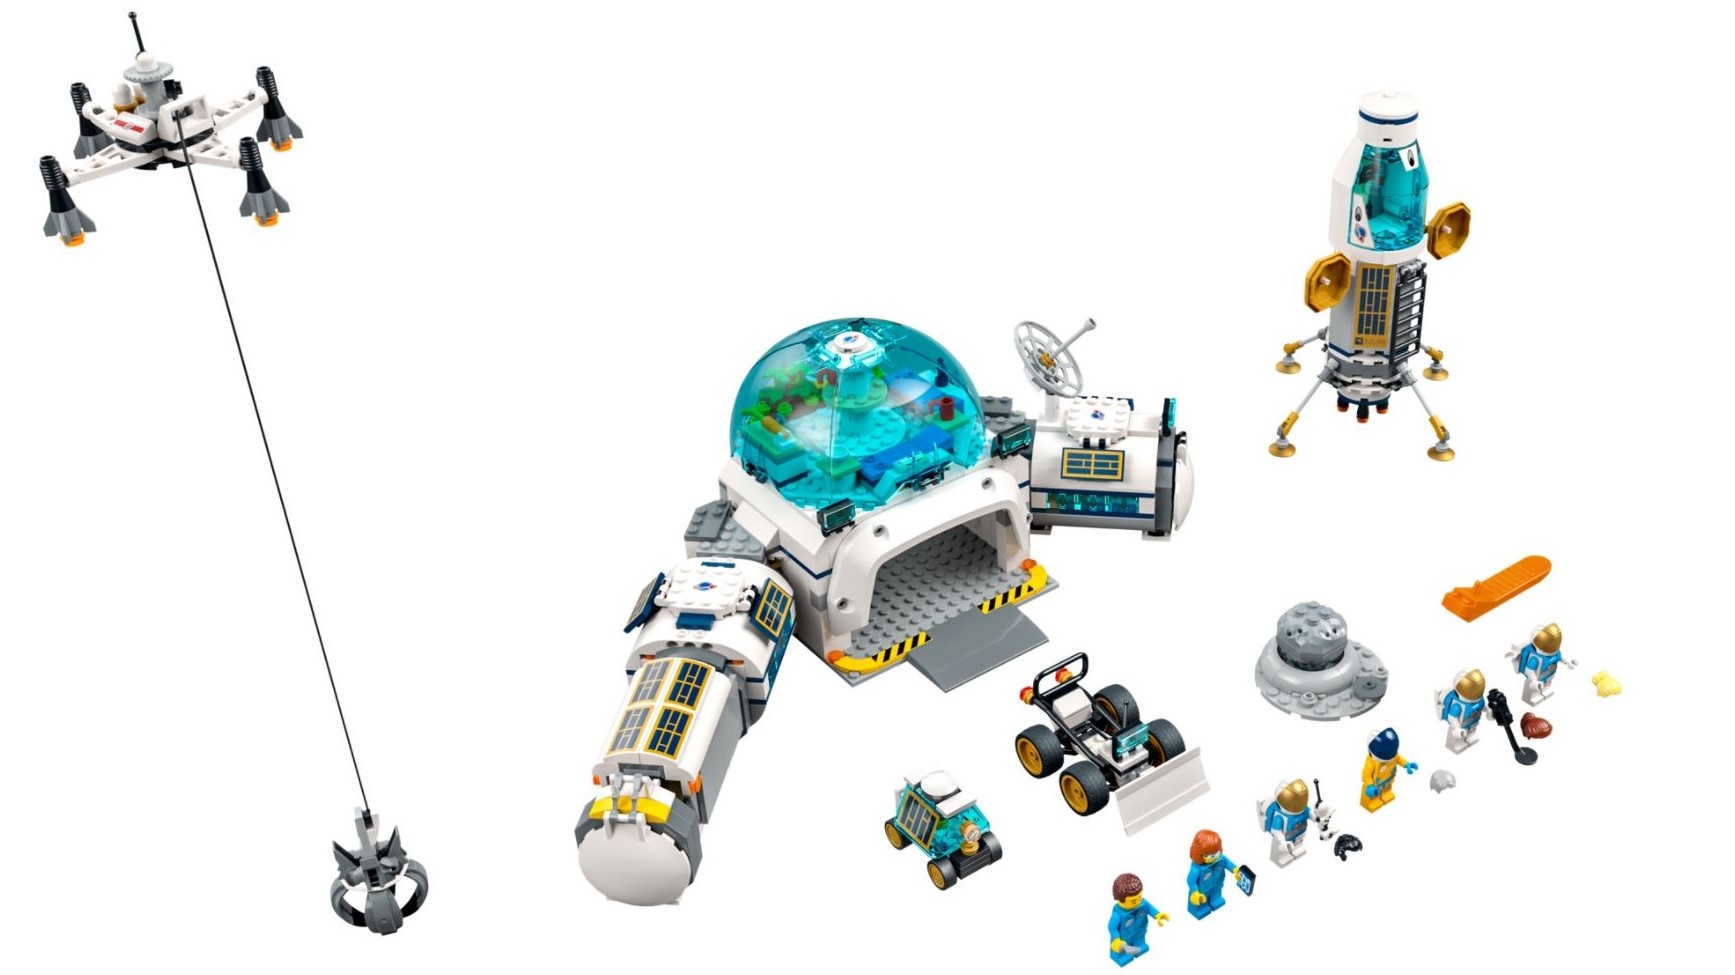 Lunar Research Base__The LEGO Group